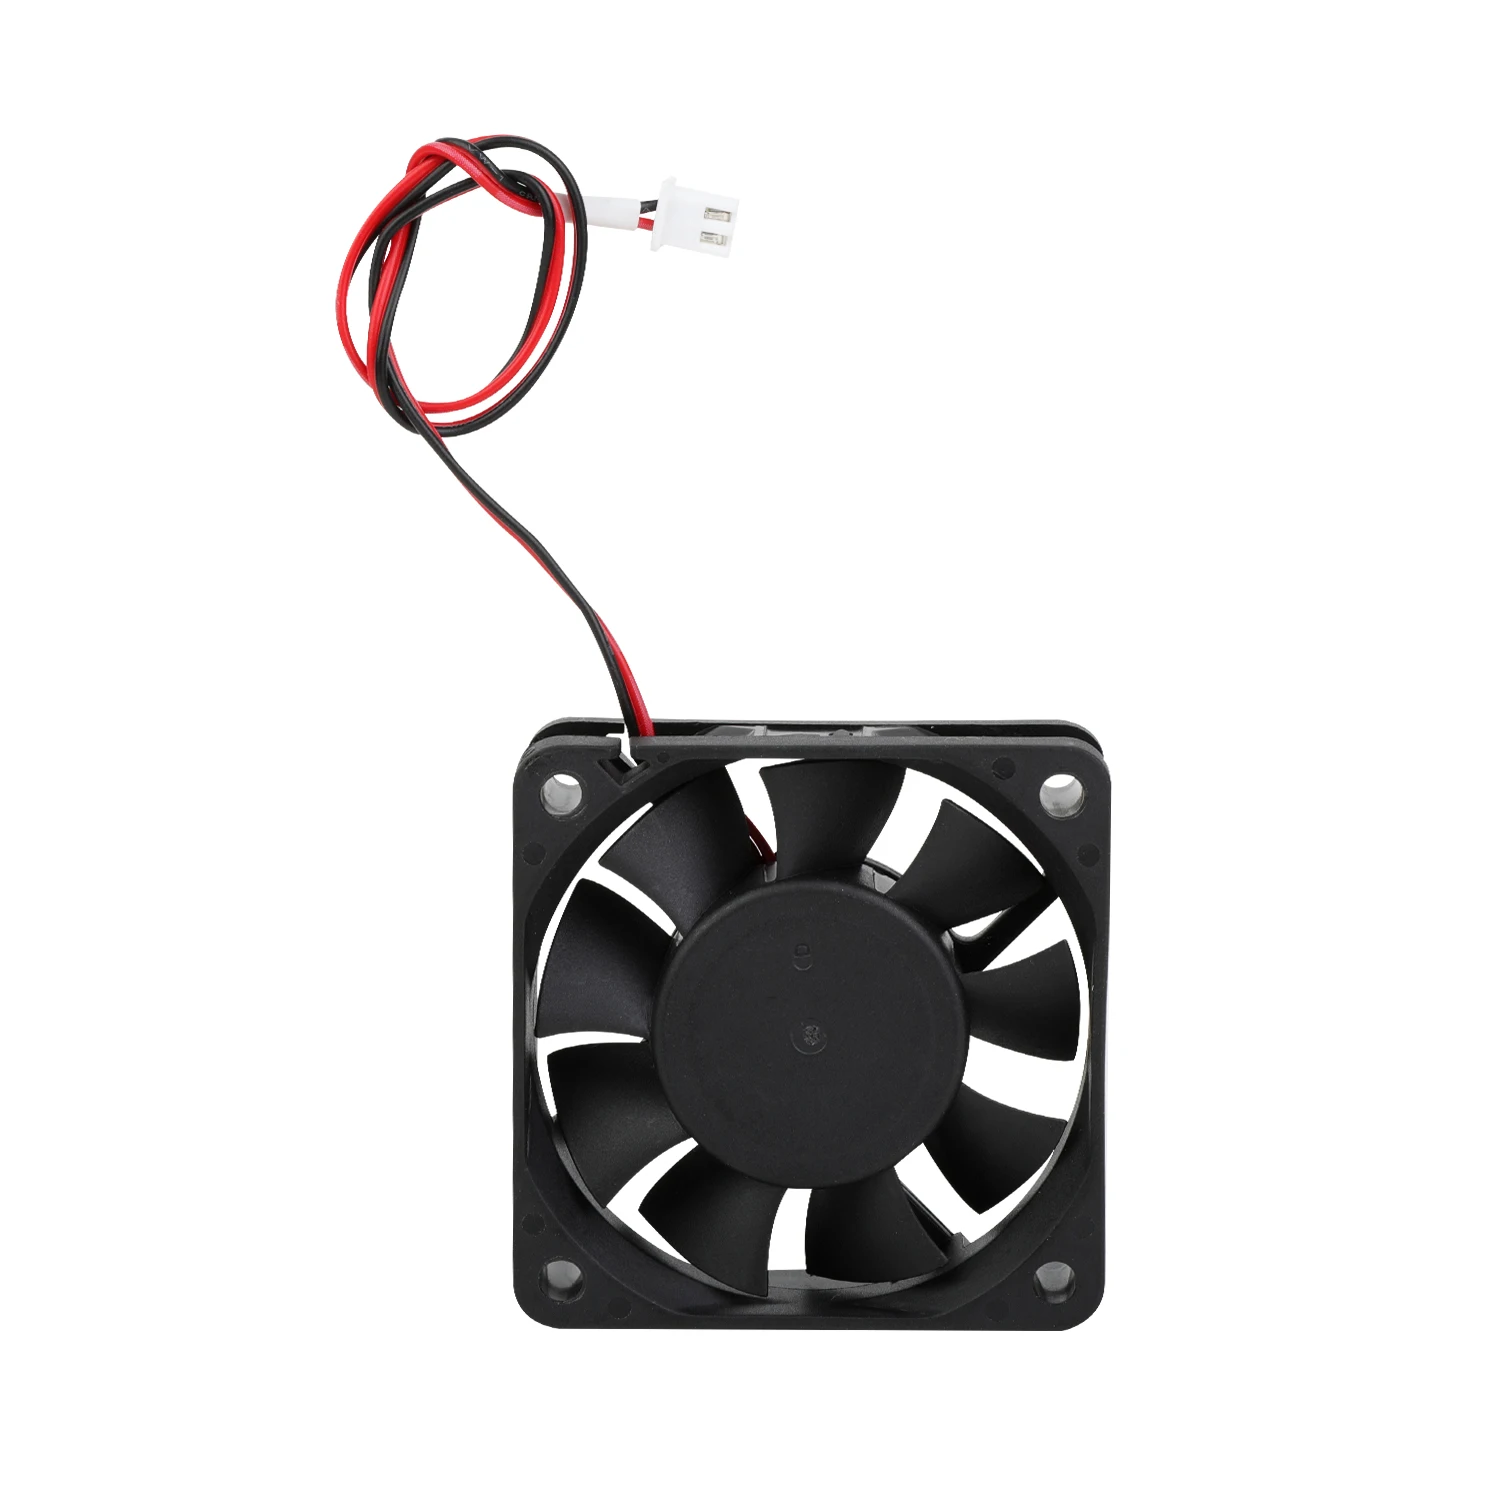 

CREALITY 3D Printer Parts Original 6015 DC 24V Axial Brushless Cooling Fan For HALOT-ONE/ HALOT-ONE Pro/HALOT-ONE Plus Printer